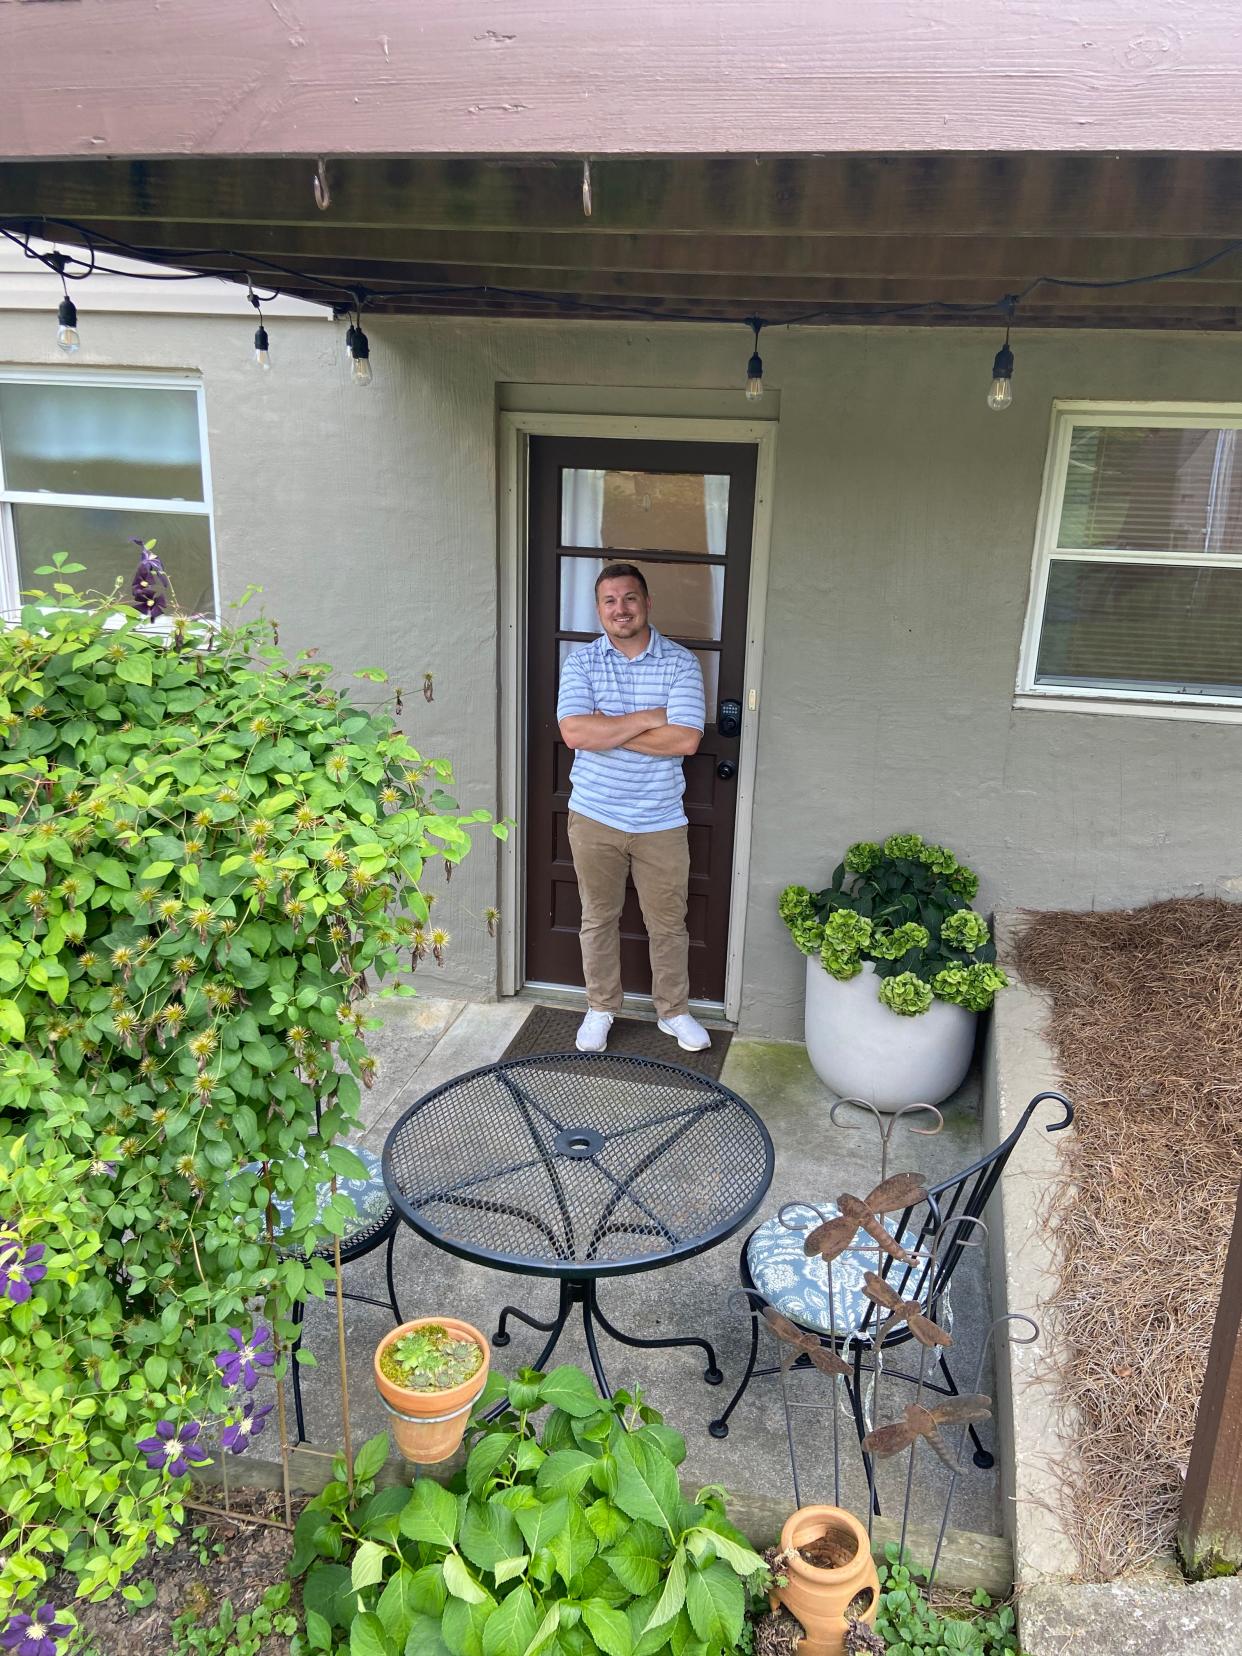 Airbnb Superhost Luke Scates, in front of his guest suite on June 22, 2022. Scates has been recognized in Airbnb’s 30 Under 30 class of 2022 with other successful hosts across the country.